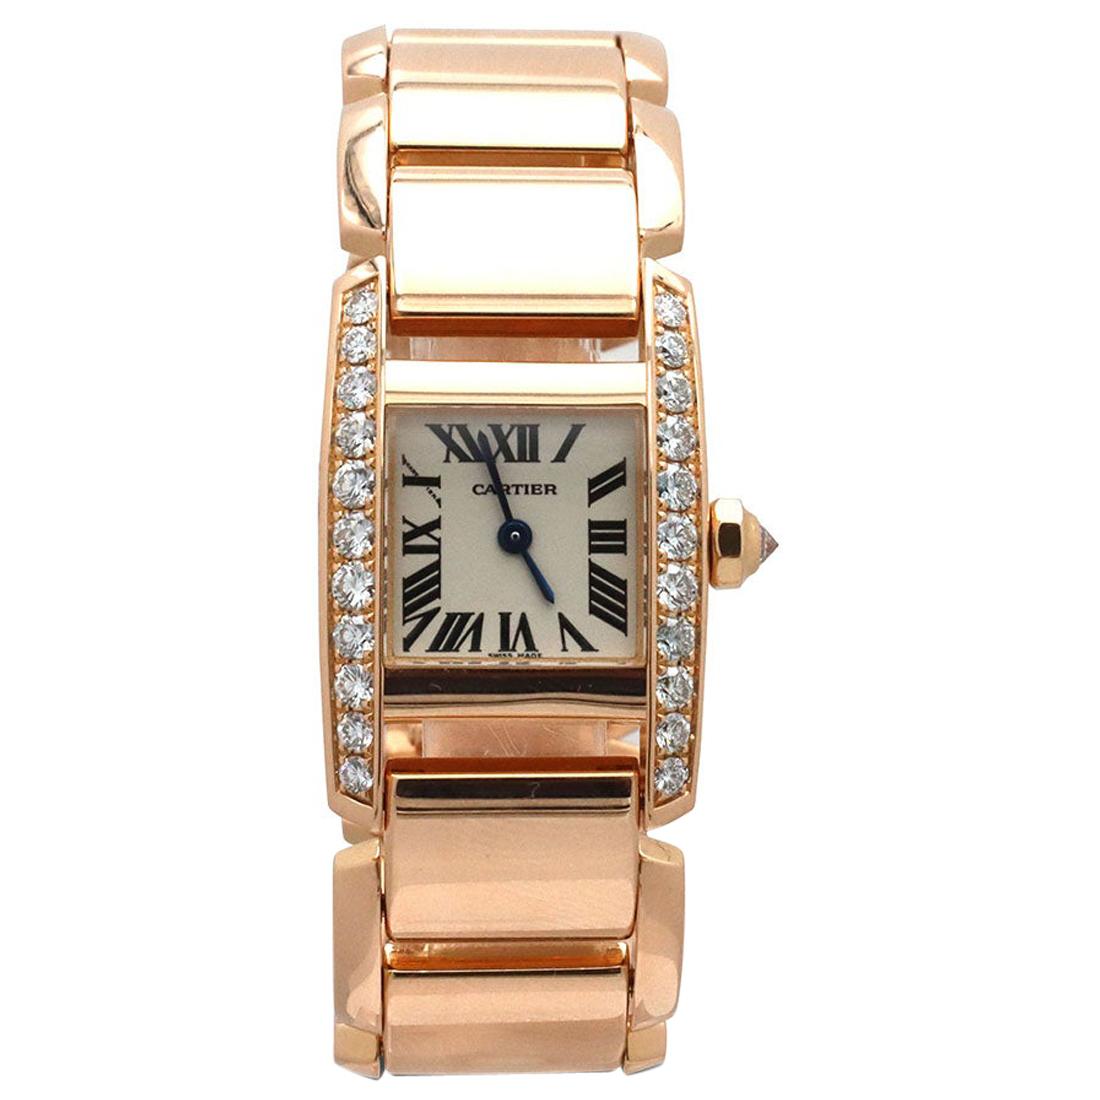 Cartier 'Tankissime' Rose Gold and Diamond Watch